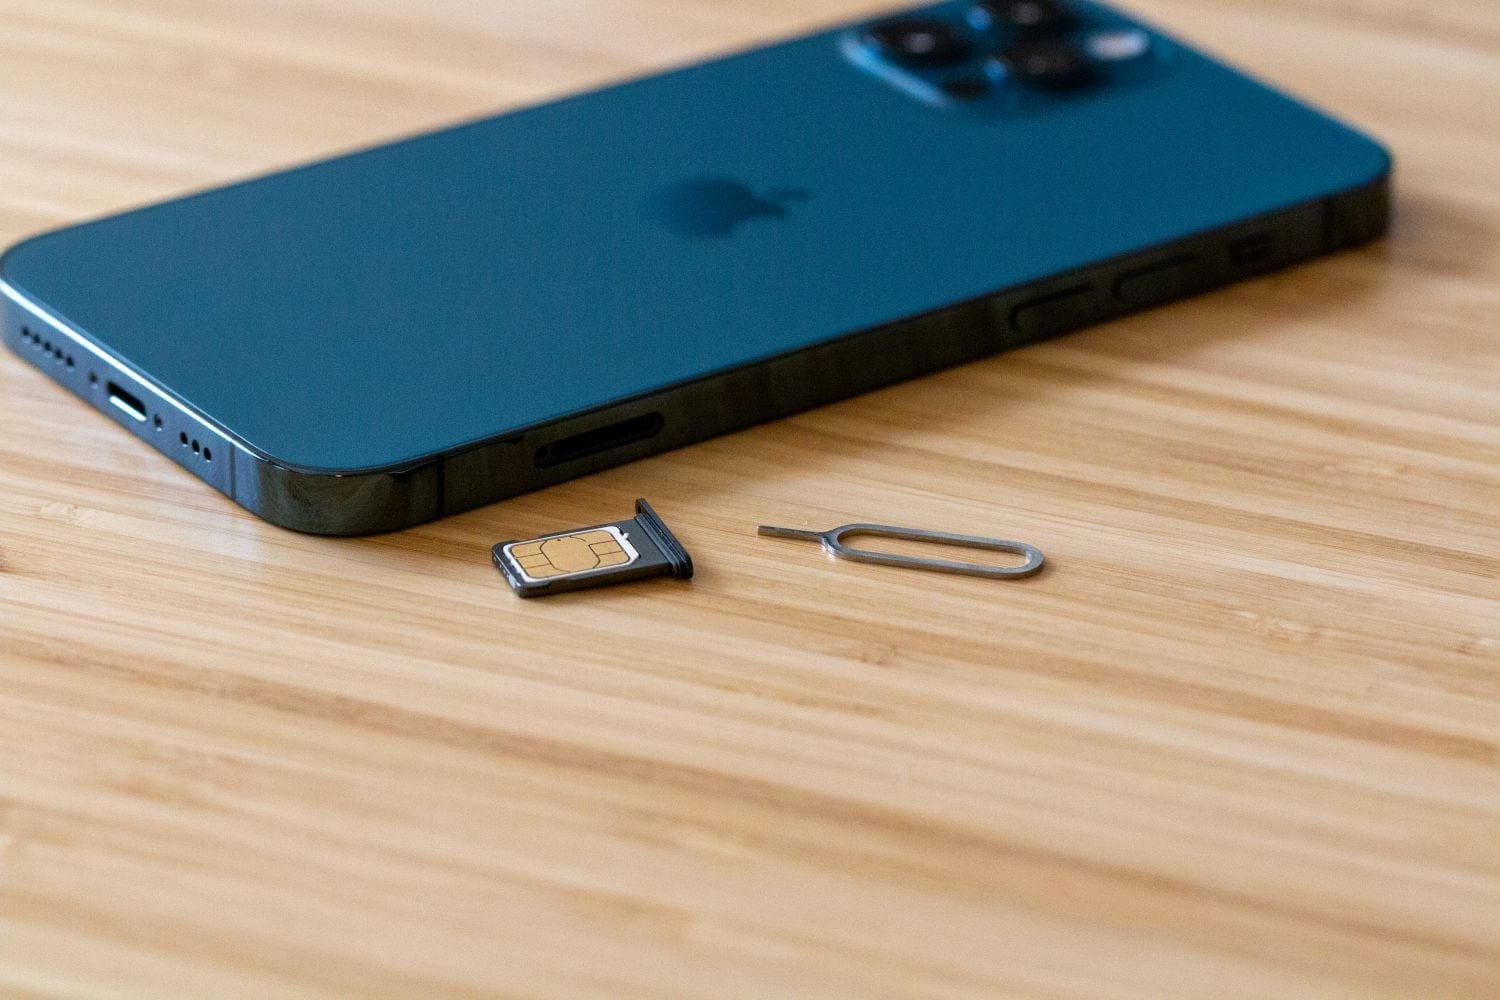 removing-sim-card-from-iphone-8-a-step-by-step-guide